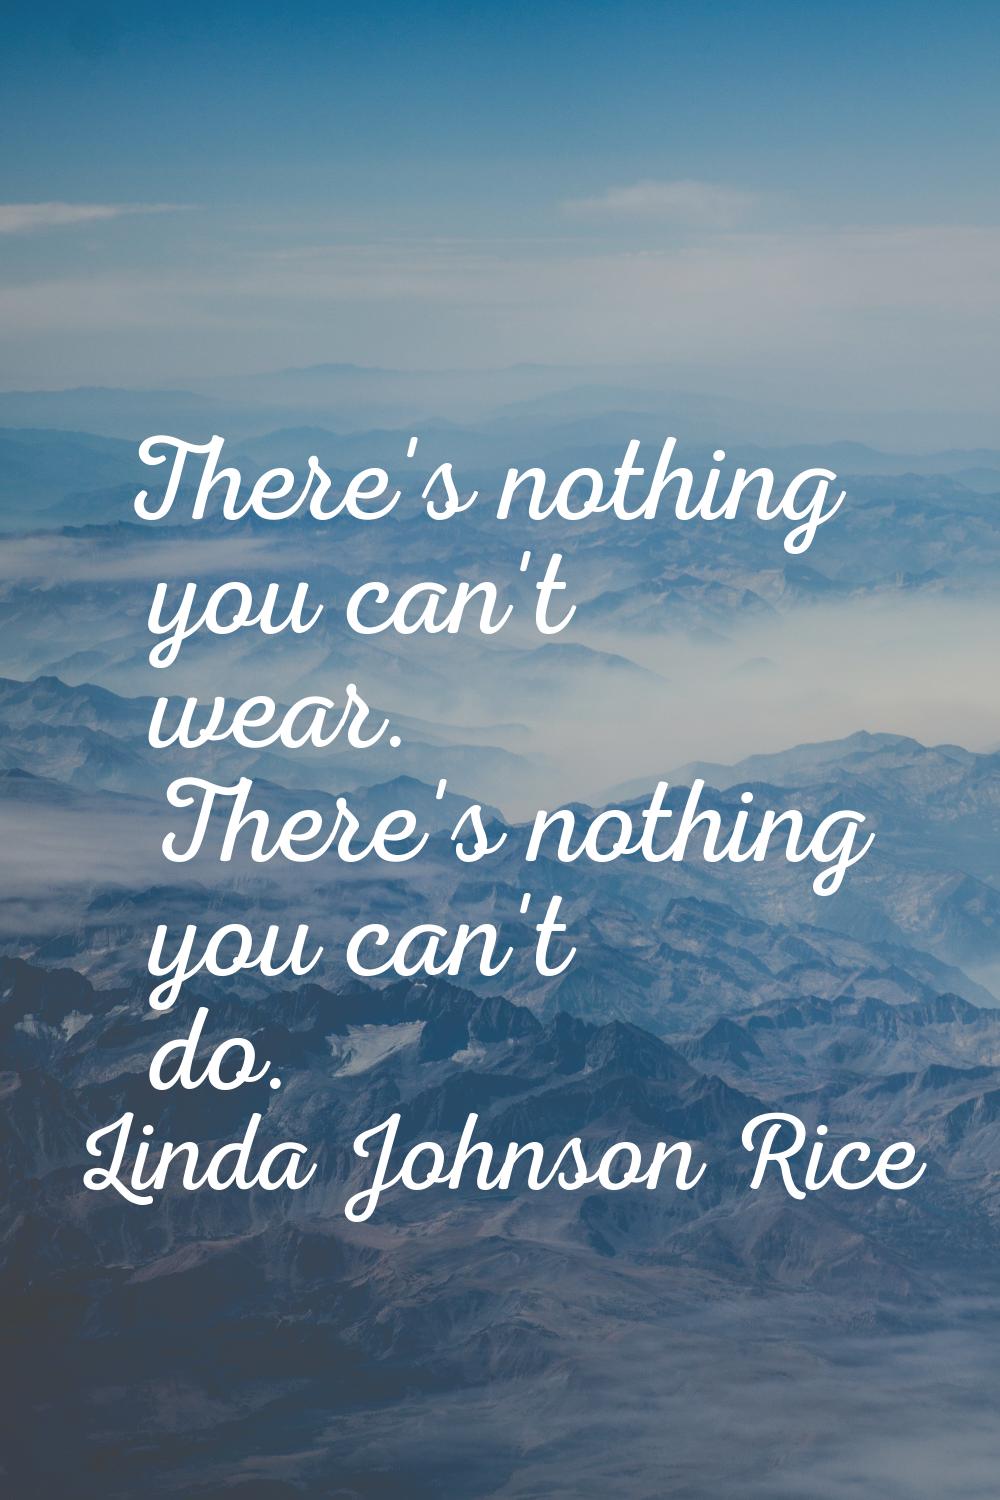 There's nothing you can't wear. There's nothing you can't do.